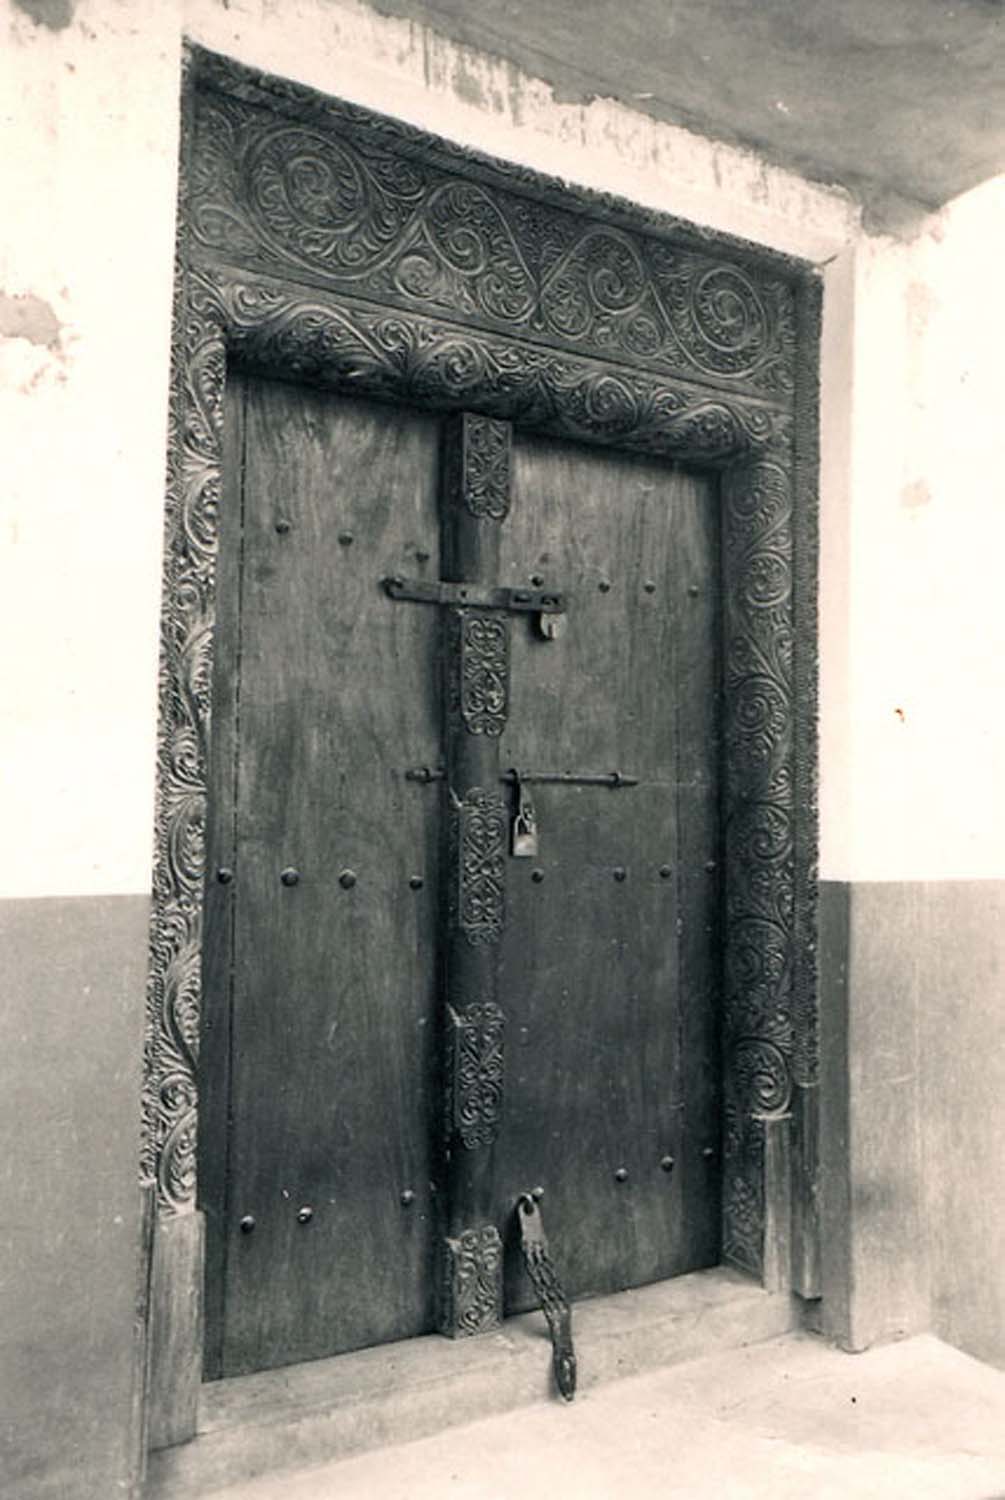 Exterior view of the intricately carved Swahili door in a go-down